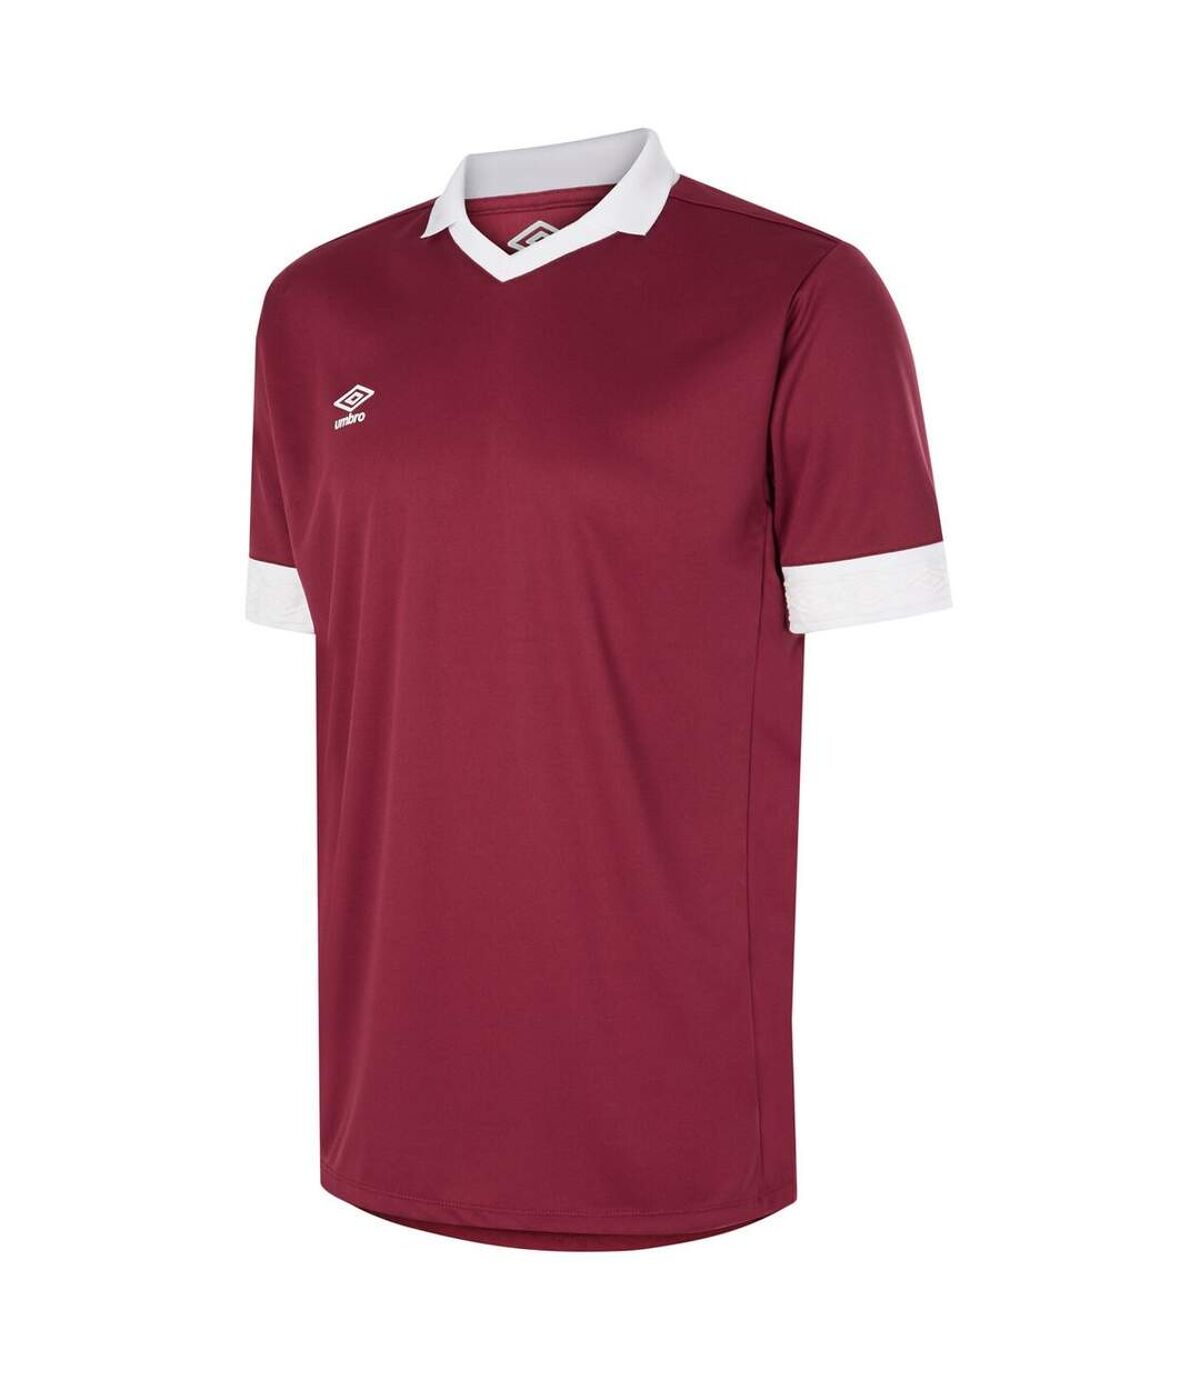 Umbro - Maillot TEMPEST - Homme (Bordeaux / Blanc) - UTUO833